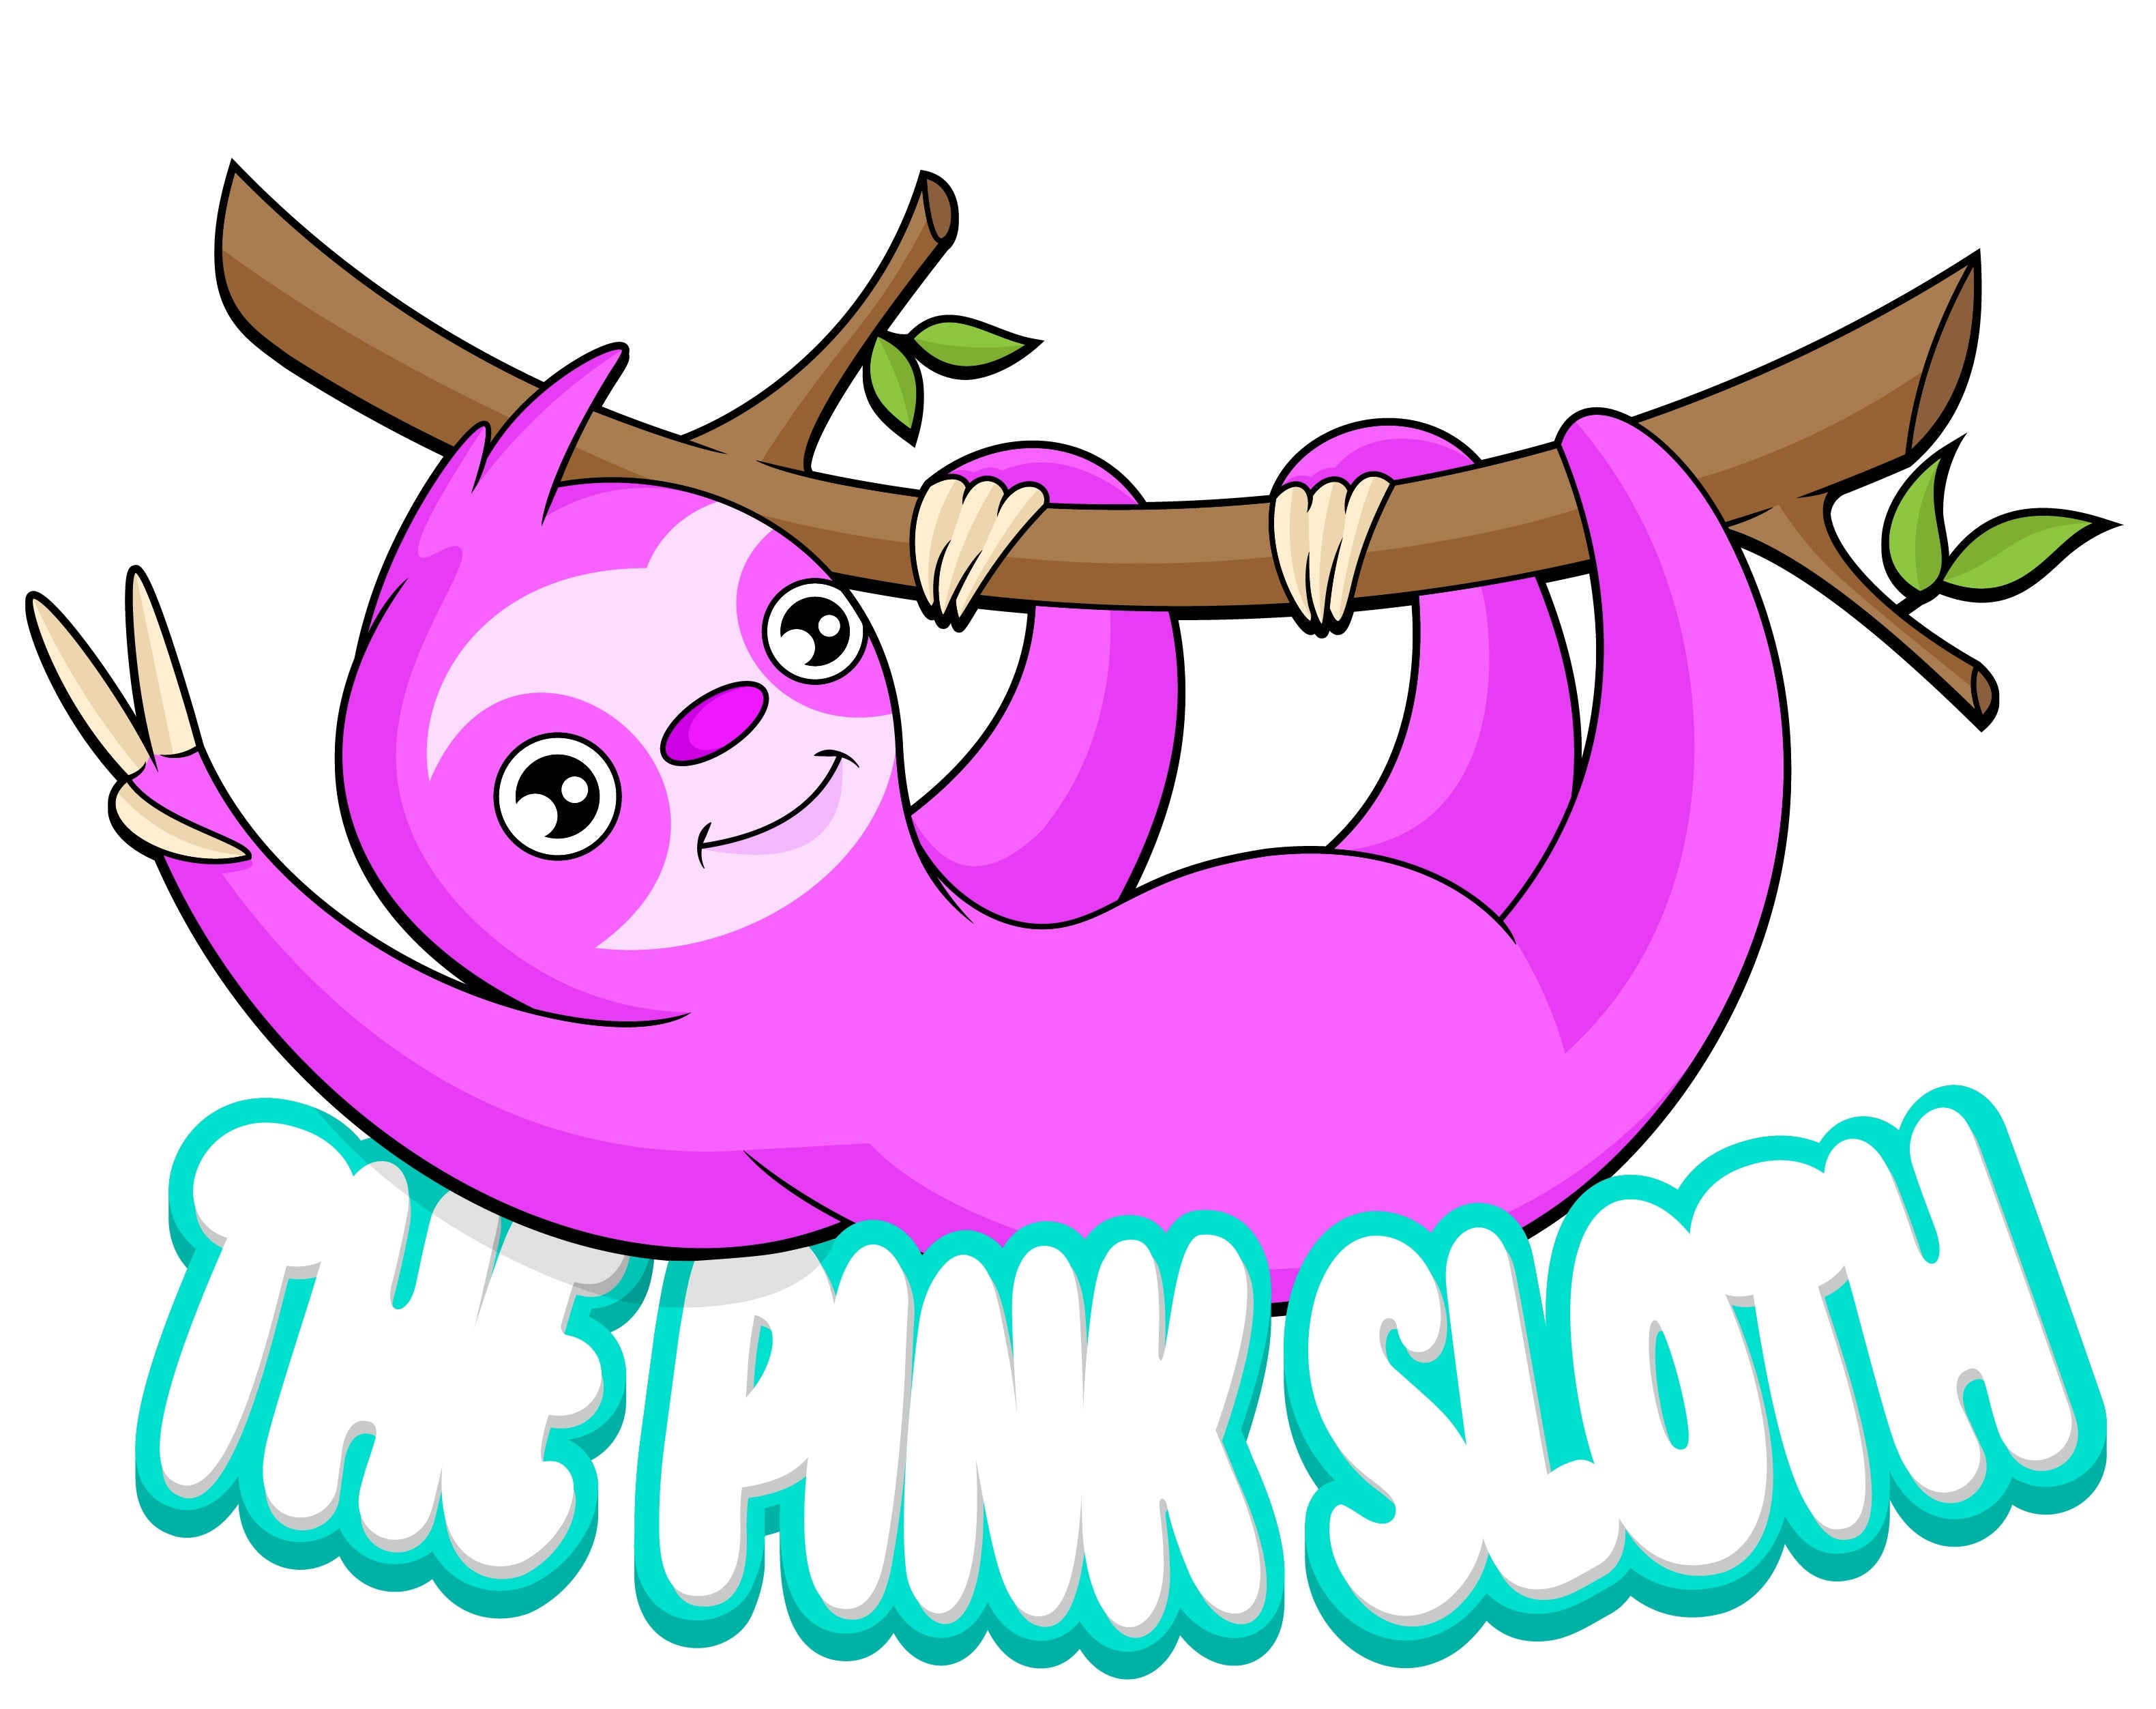 The Pink Sloth